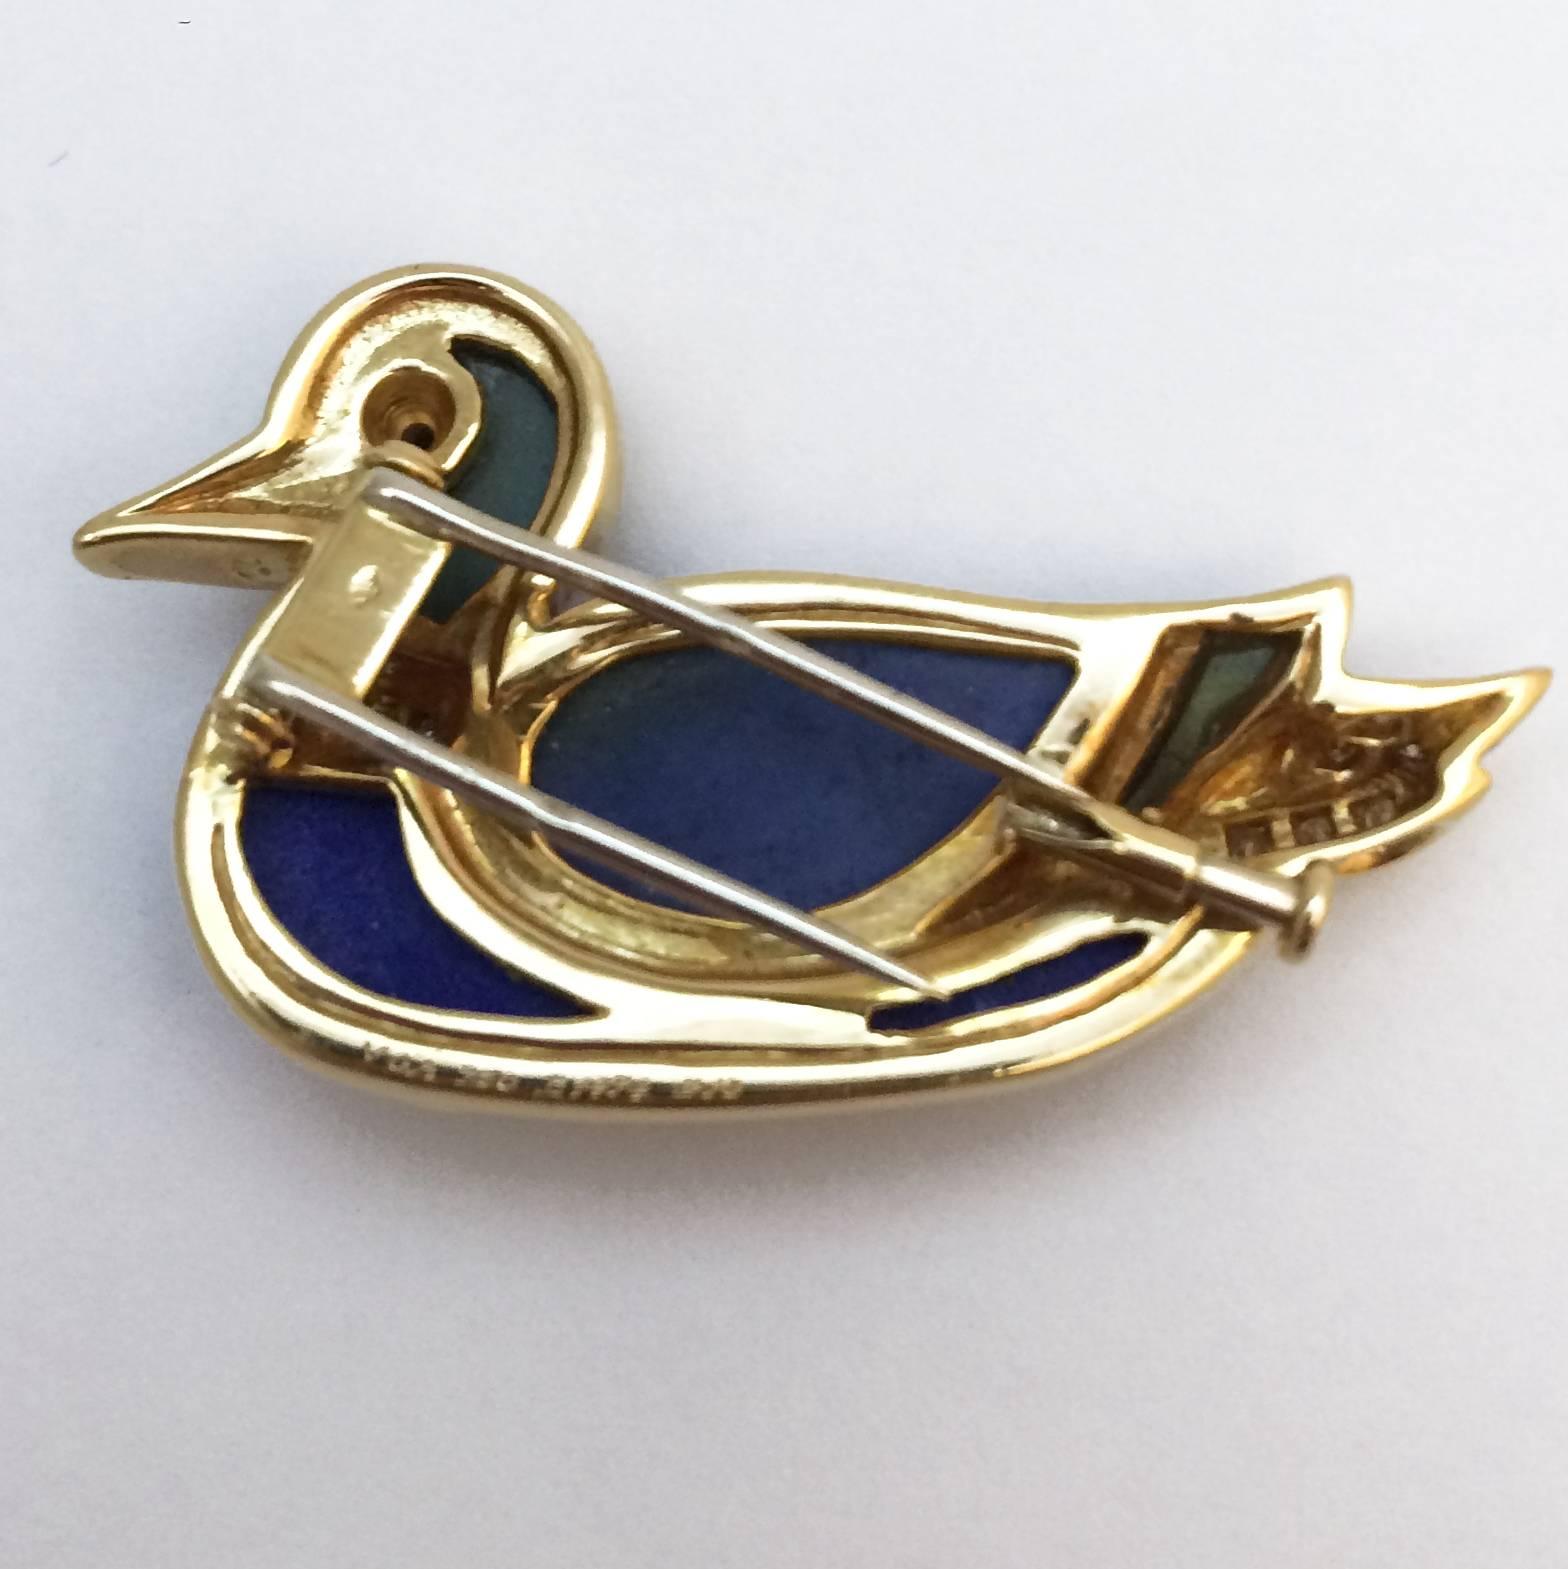 A yellow gold 750/000 Van Cleef and Arpels brooch figuring a profiled duck. The body is set with Lapis lazuli, the neck and the tail are set with brilliant cut diamonds, the head and the back of the wings are set with labradorite and the eye with an